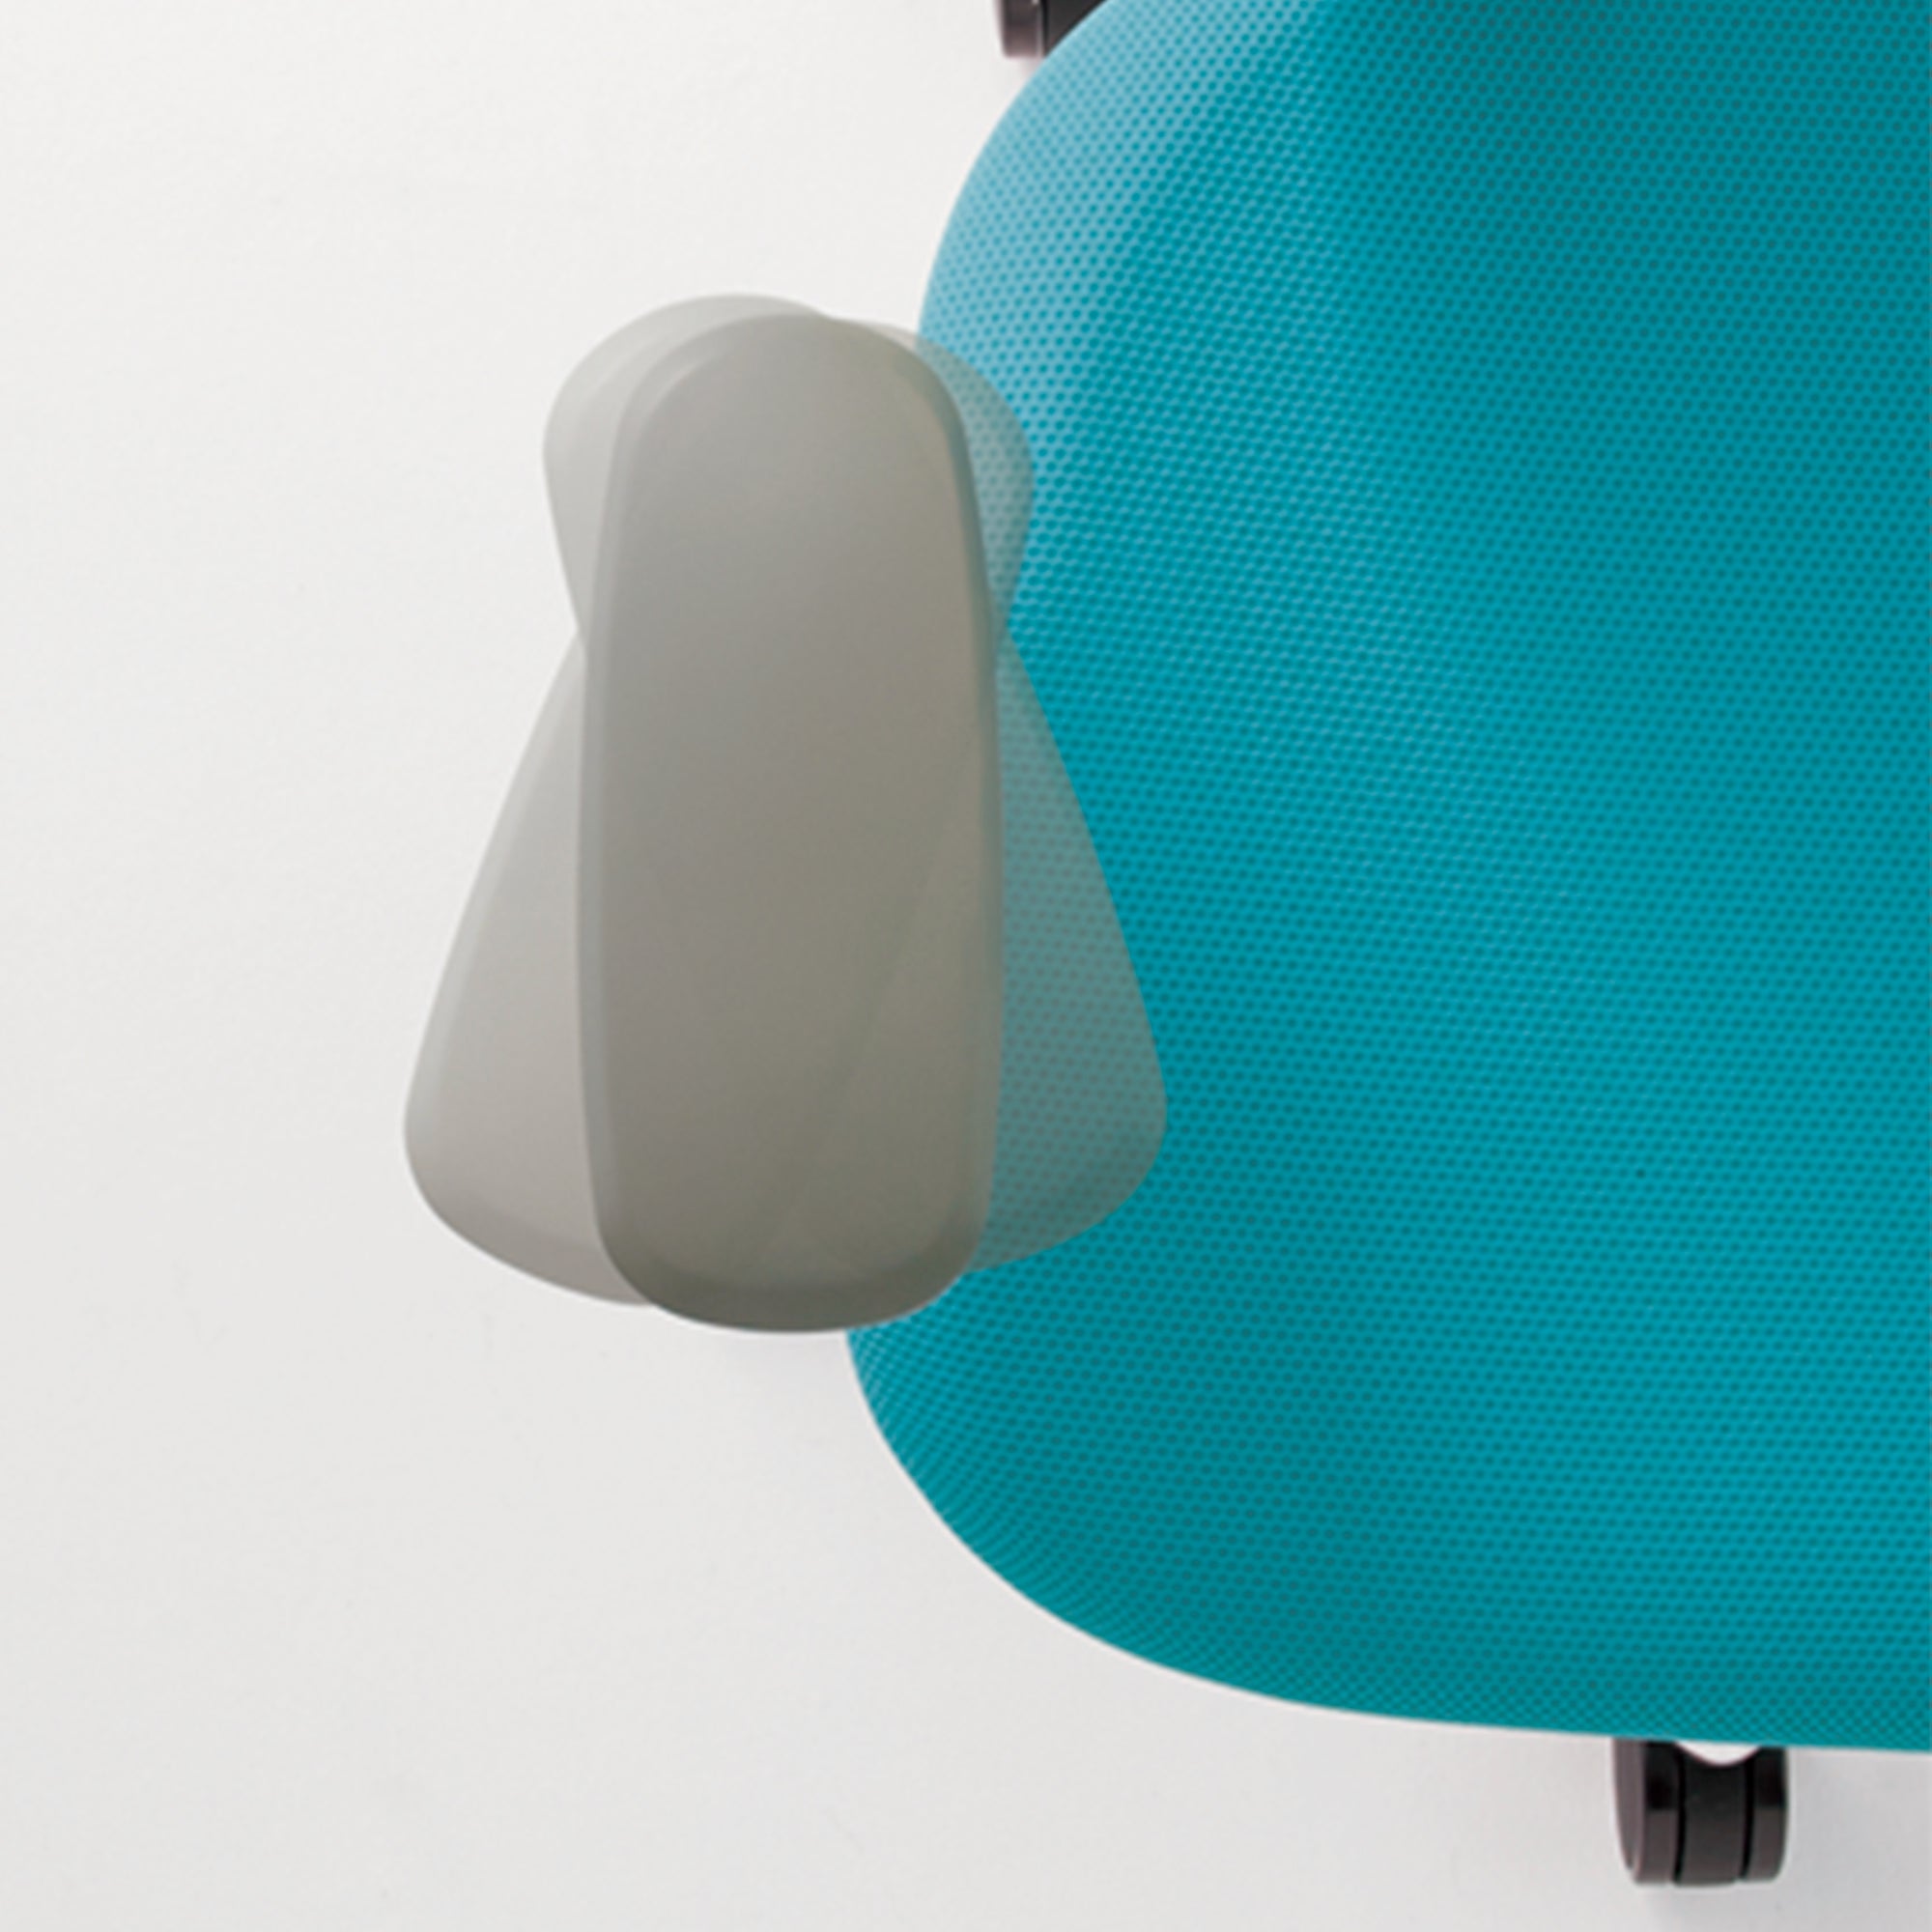 work chair with adjustable armrests